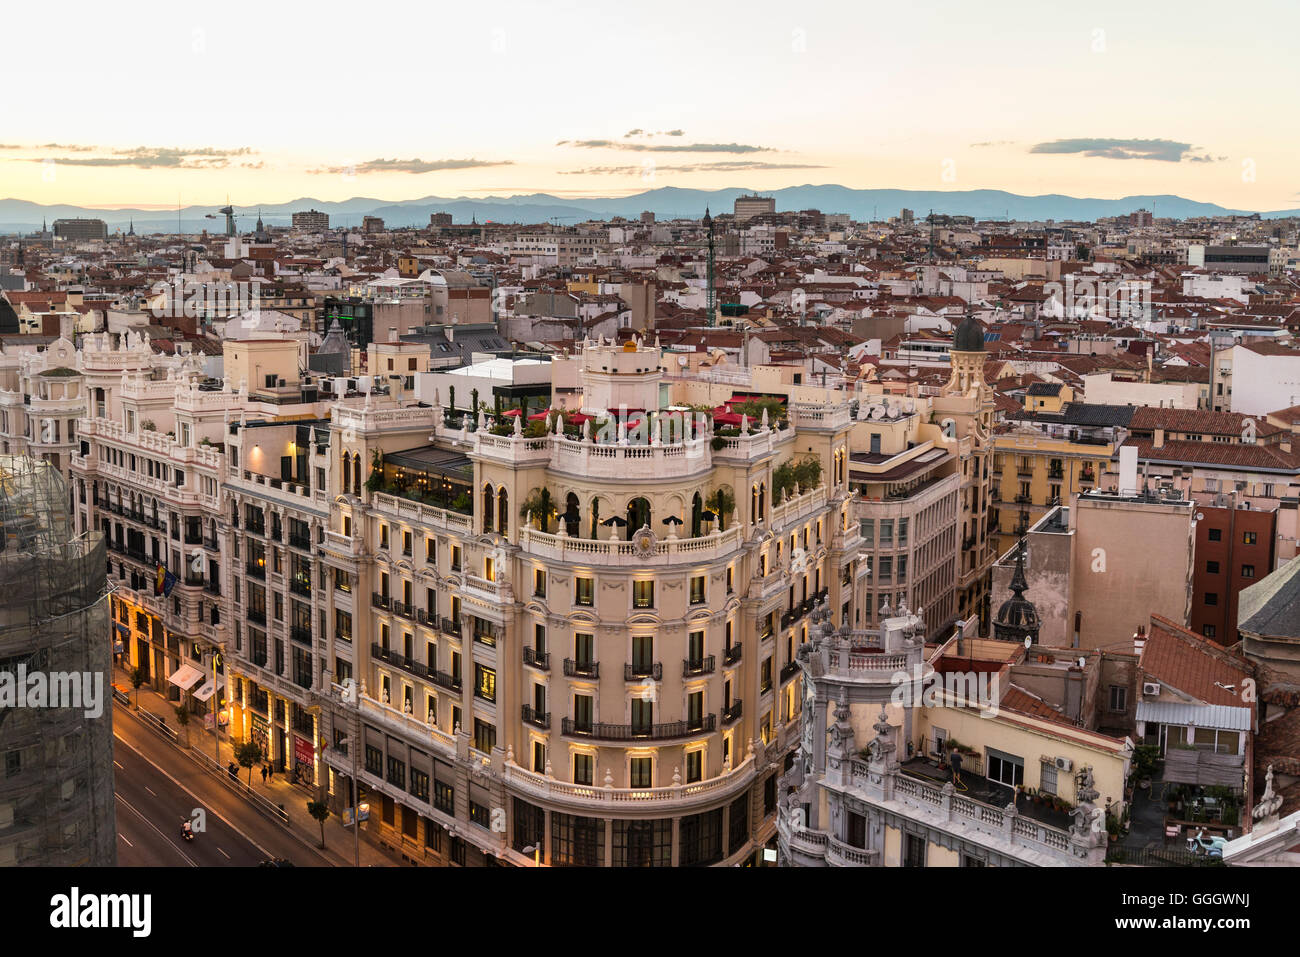 View of the skyline and buildings on Calle de Alcata, from the roof terrace of Círculo de Bellas Artes, Madrid, Spain Stock Photo